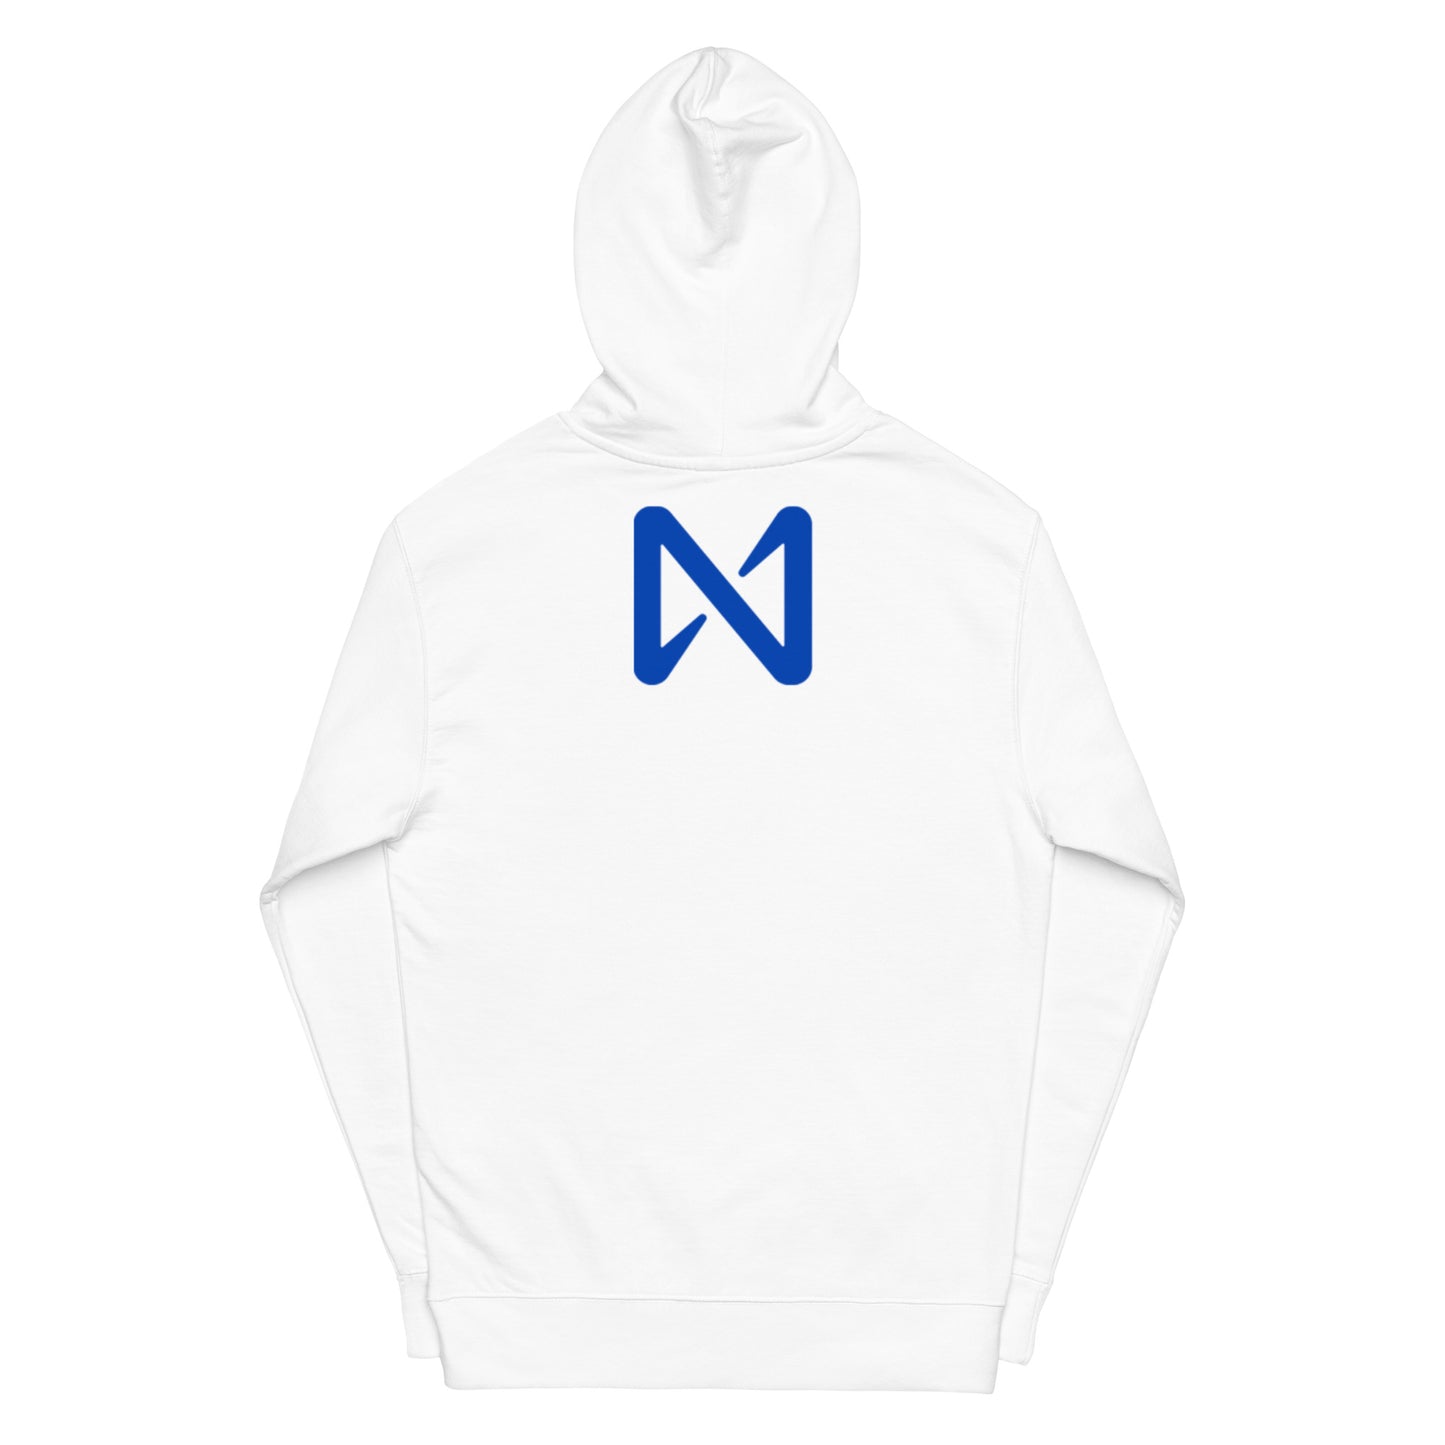 OPEN THE WEB HOODIE w/ NEAR ICON on BACK (Blue on White) Unisex Midweight hoodie